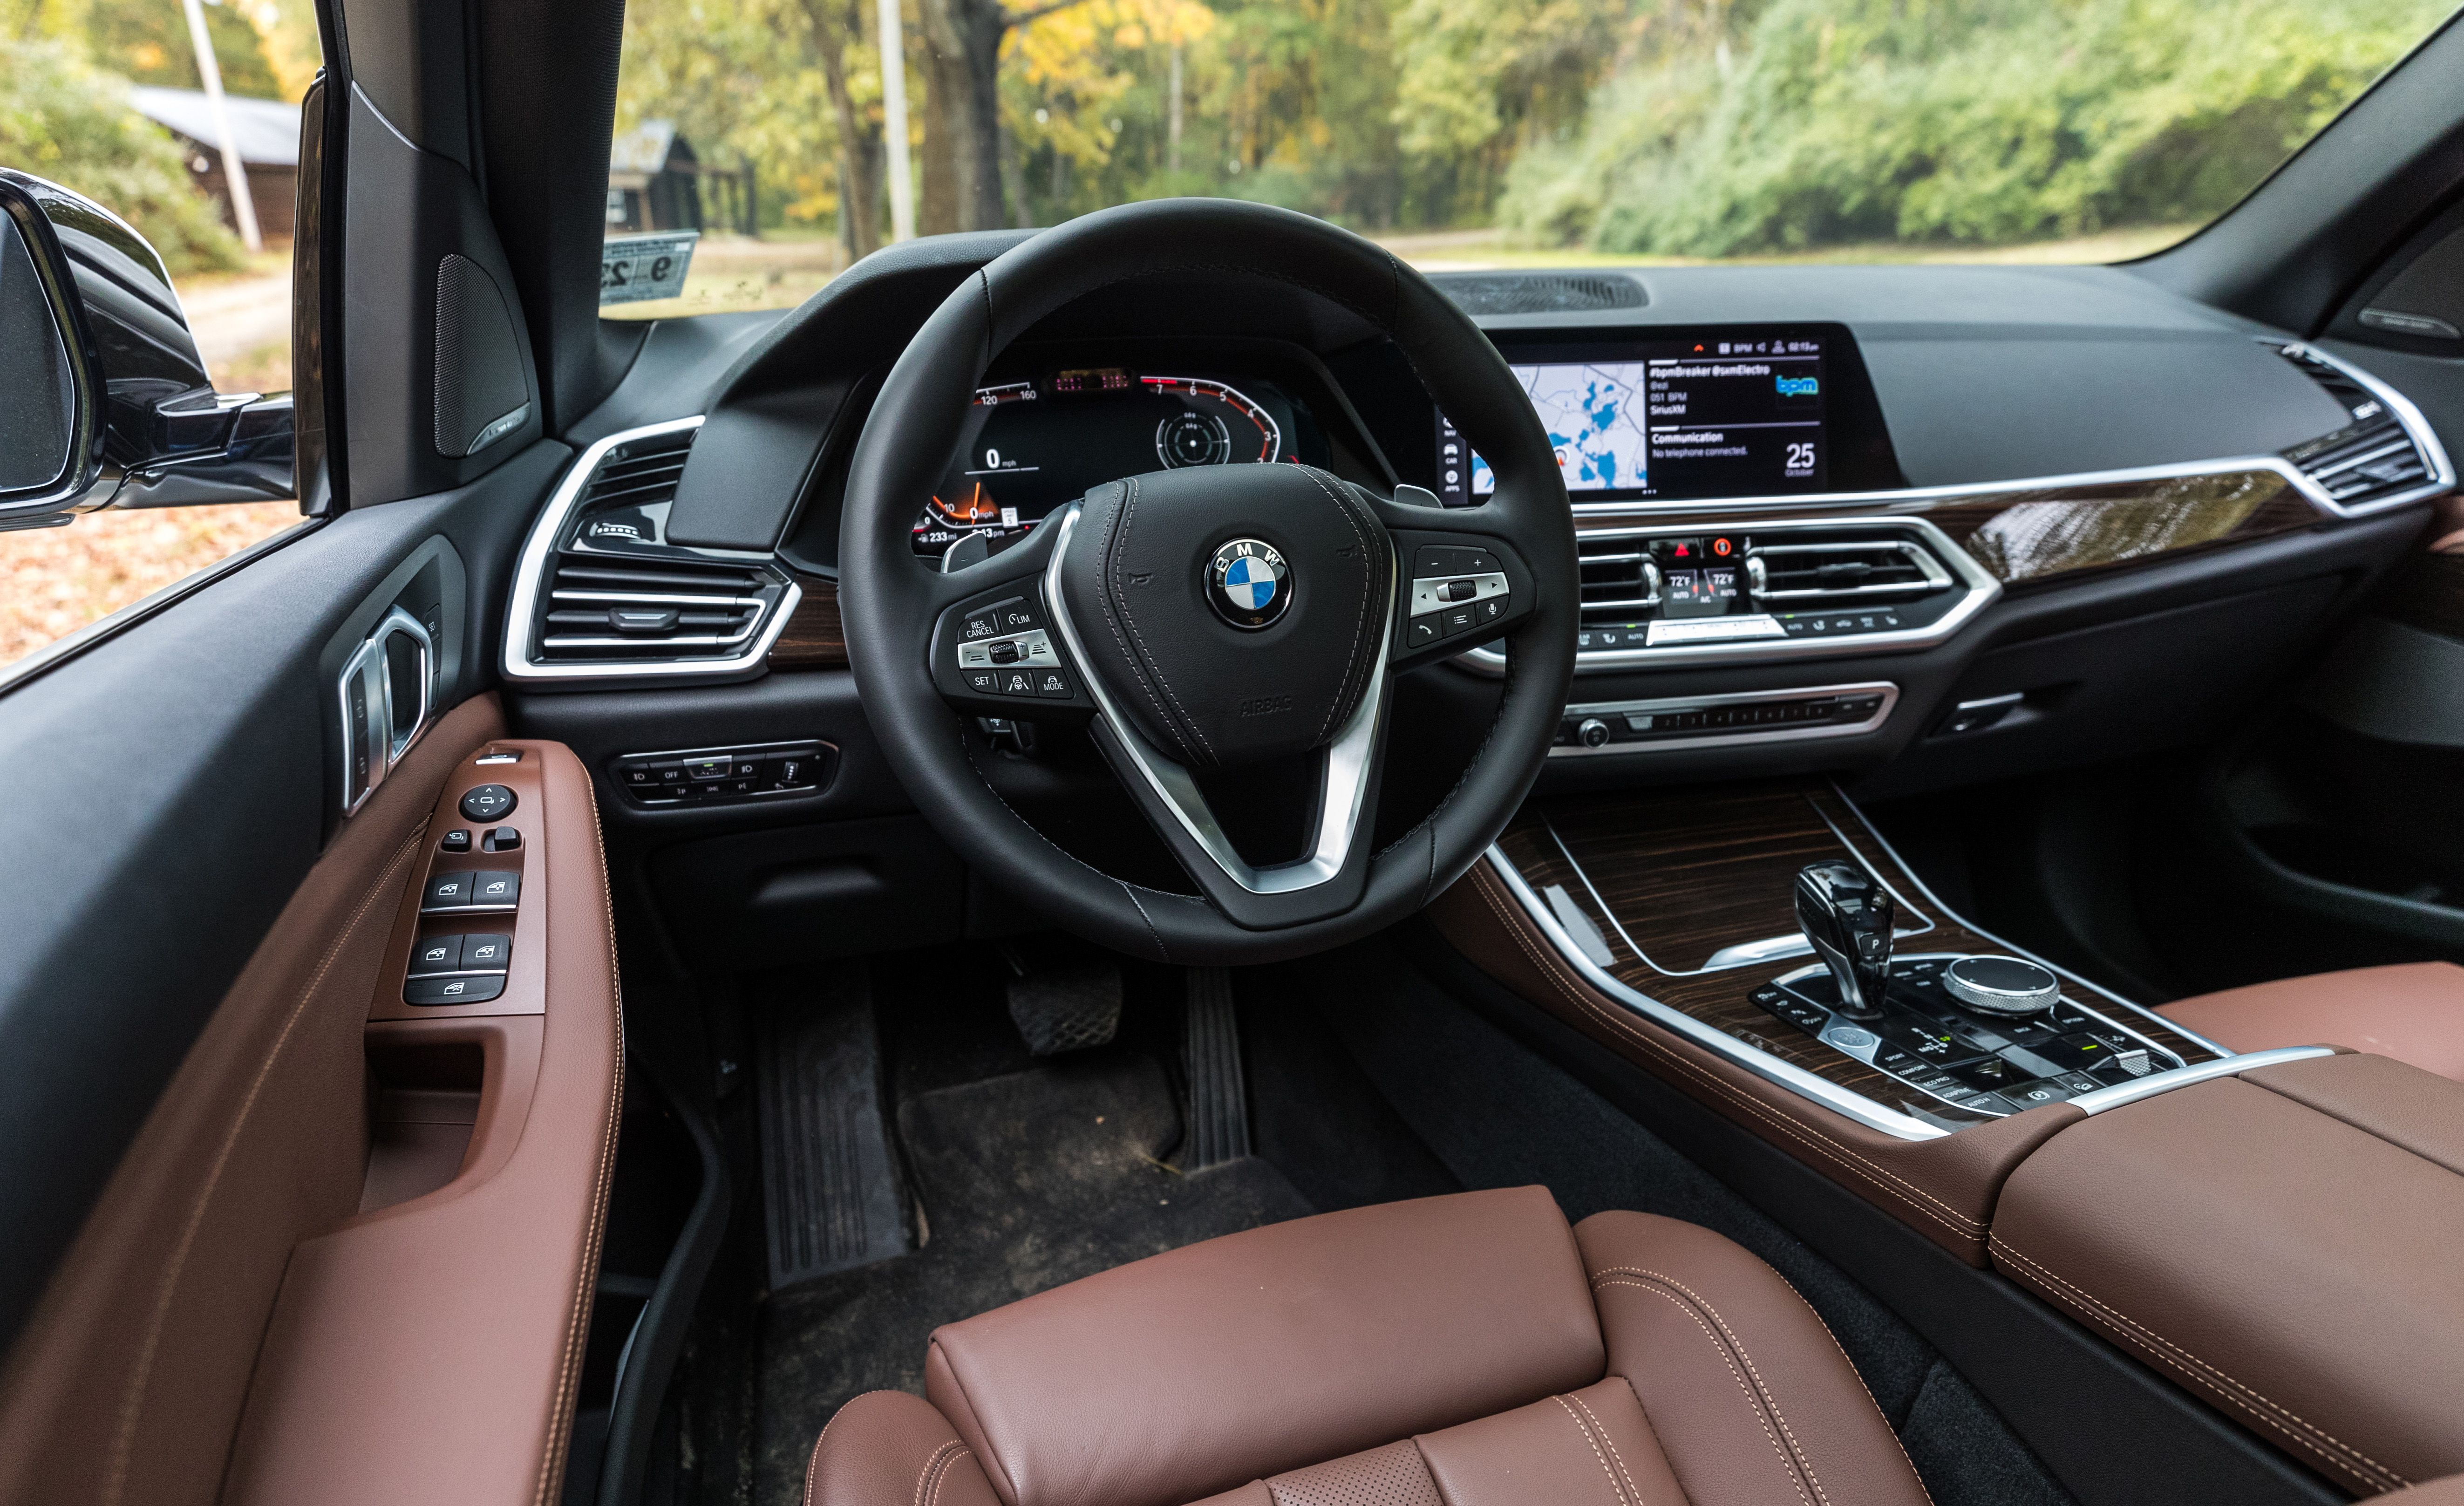 2019 Bmw X5 Improves A Proven Mid Size